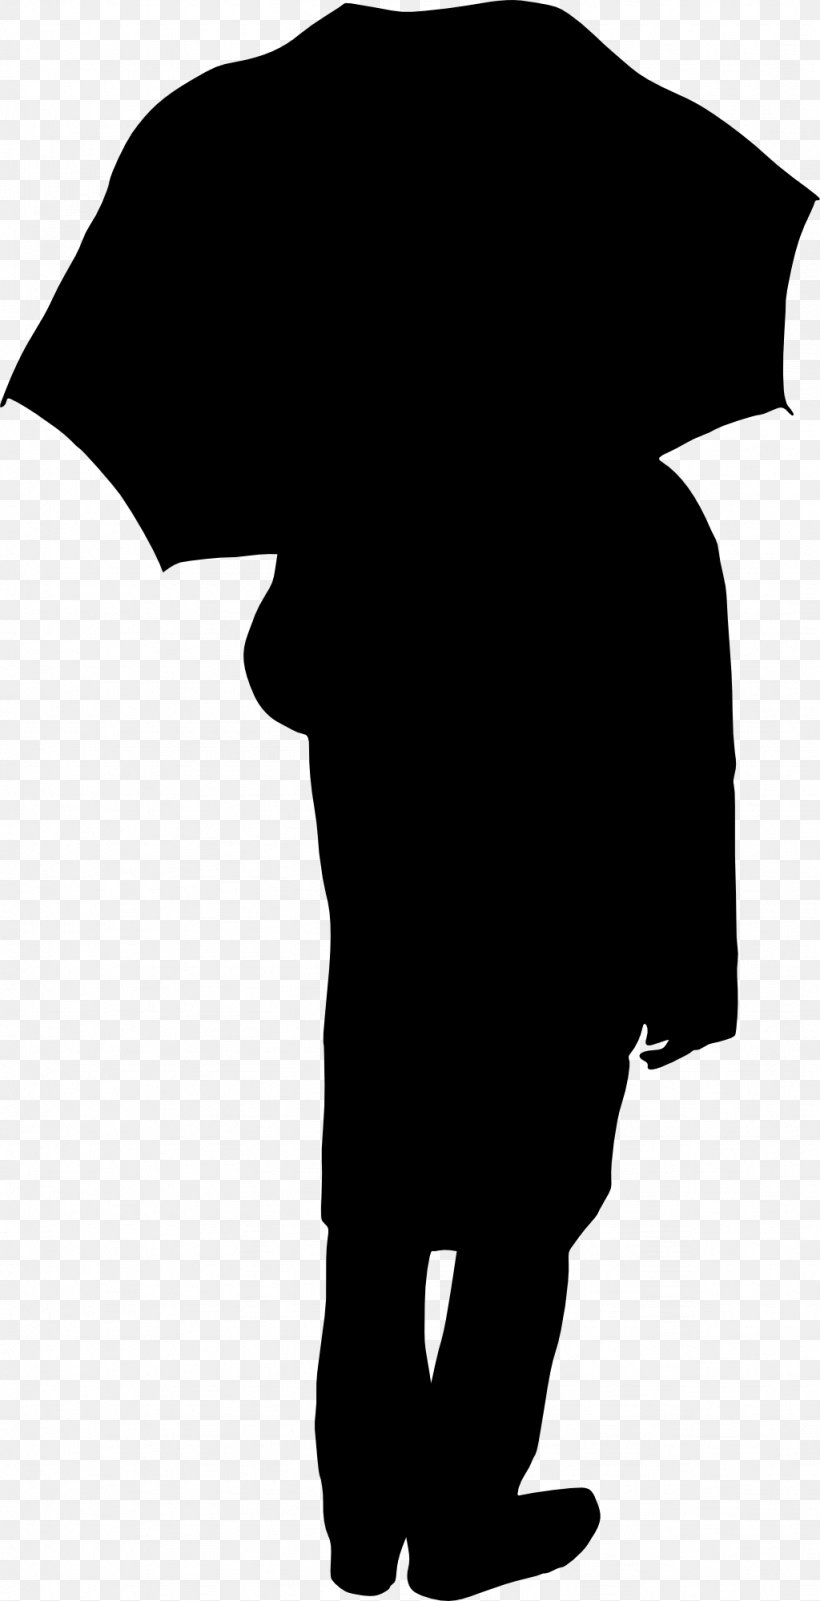 Silhouette Drawing, PNG, 1024x2000px, Silhouette, Black, Black And White, Cartoon, Depositphotos Download Free